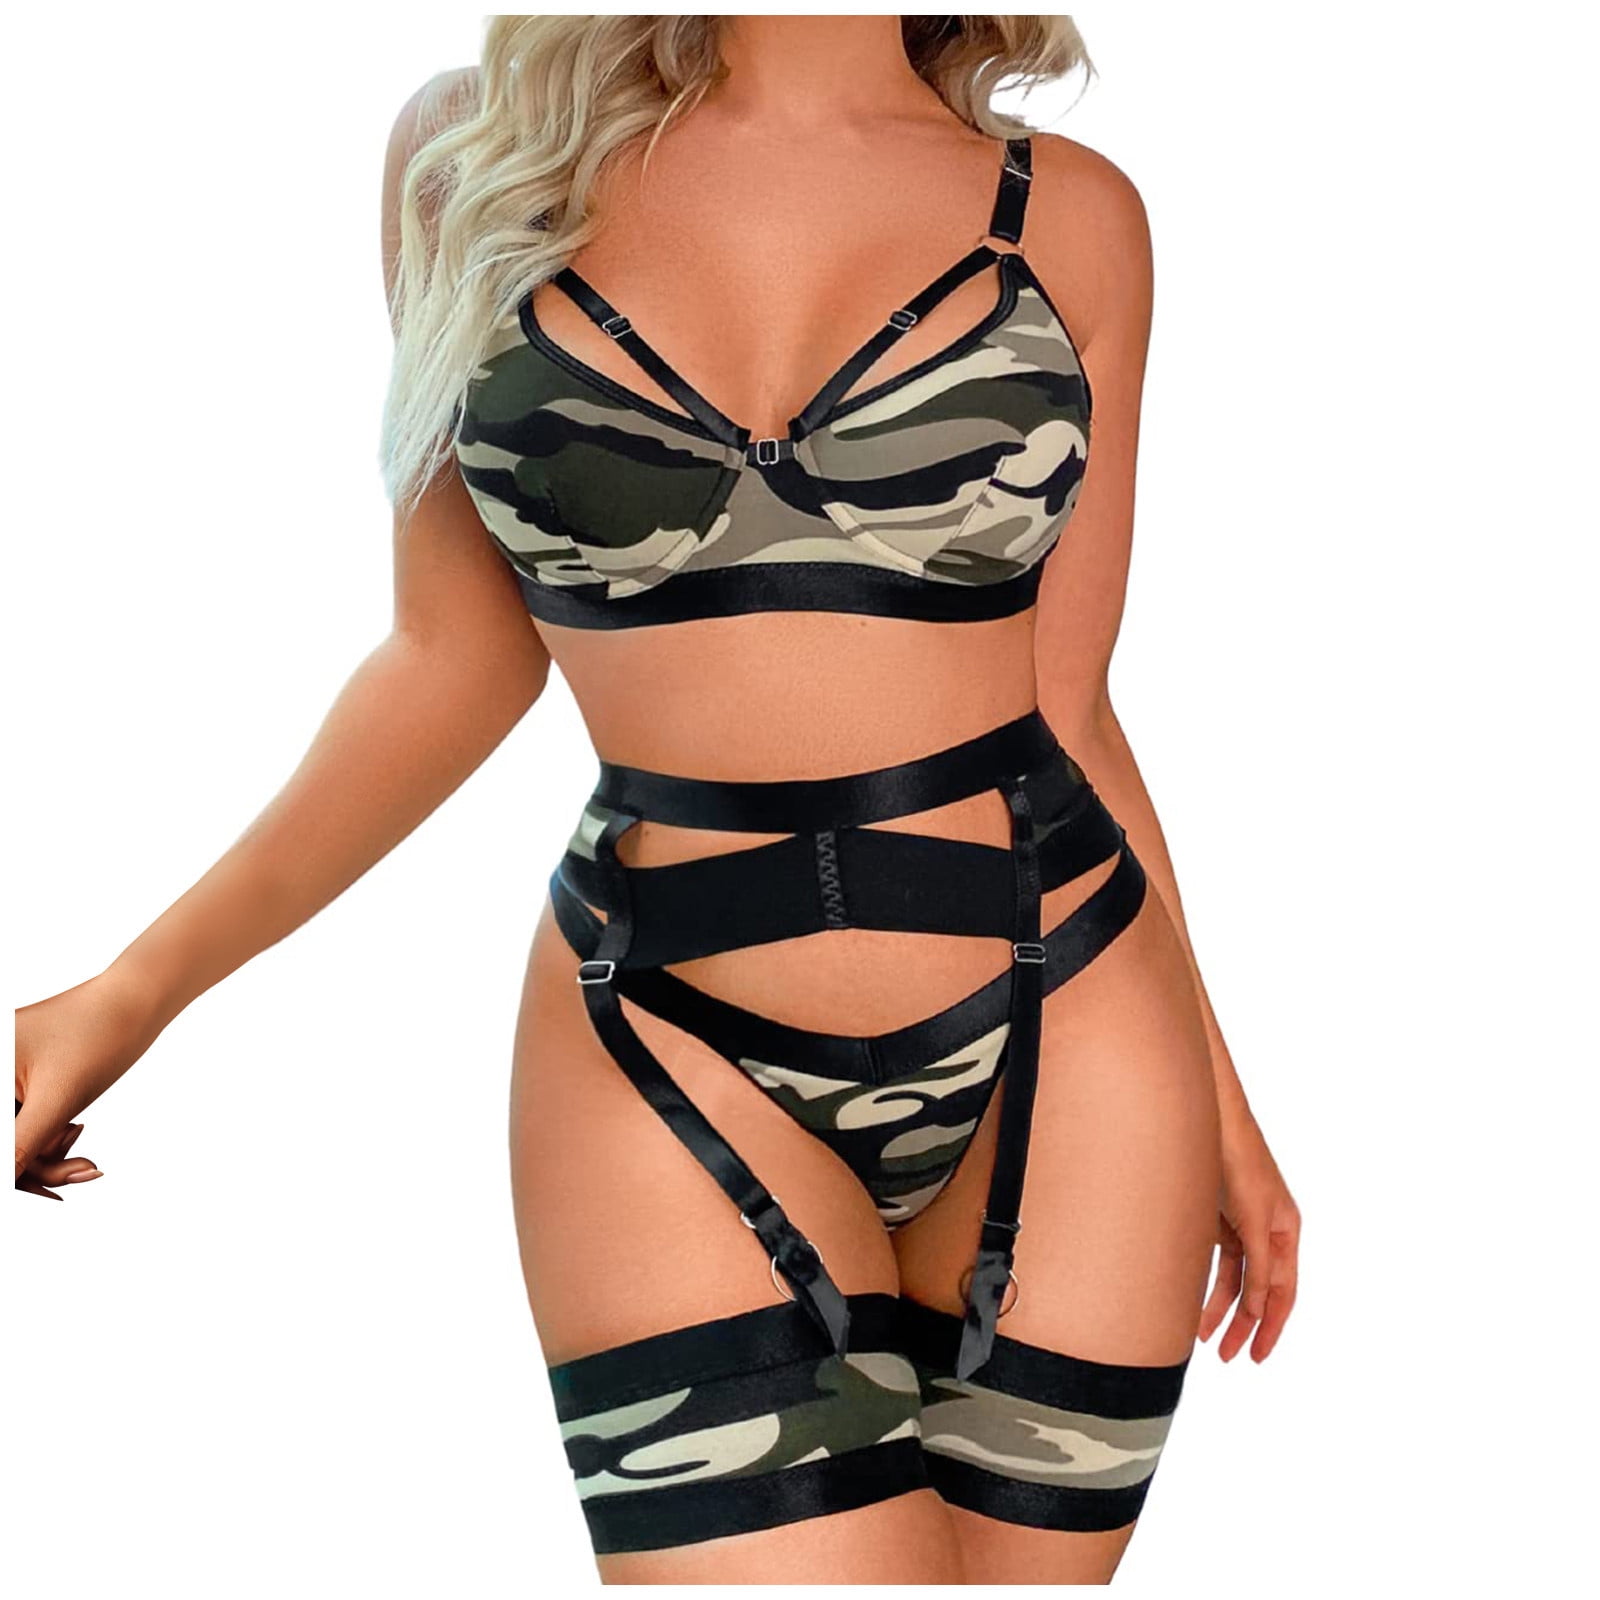 EHTMSAK Camouflage Women's Lingerie Set Sexy Babydoll Strappy Lingerie with  Garter Bra and Panty Set 3 Piece Camouflage L